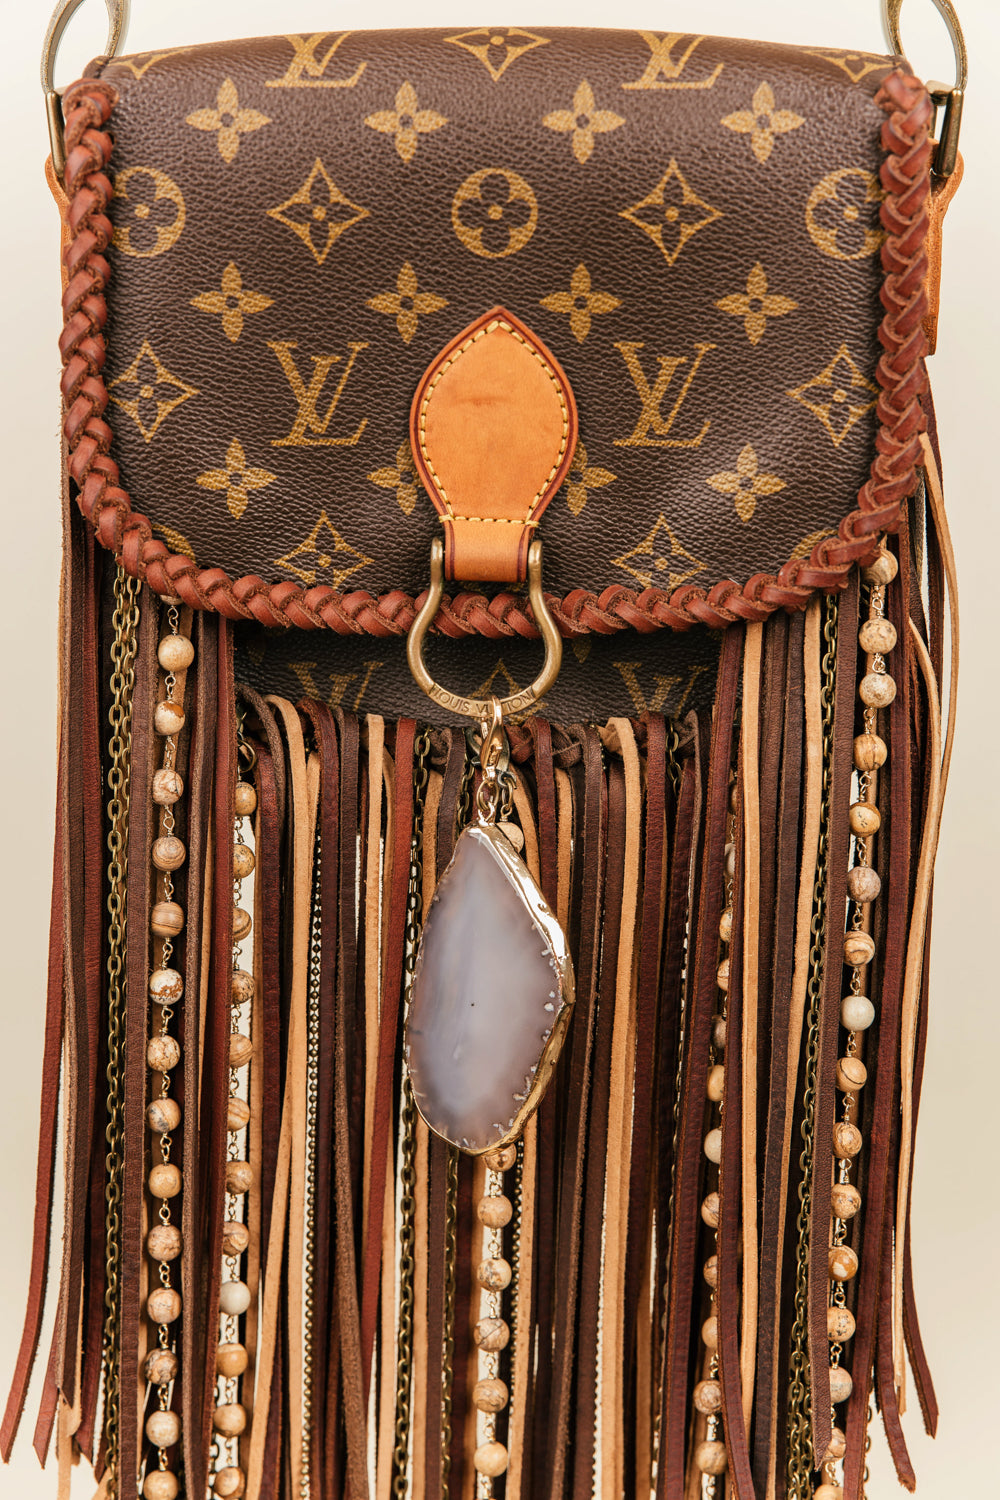 Louis Vuitton - Gold & Multicolored 'LV' Fringed Leather Bag Charm